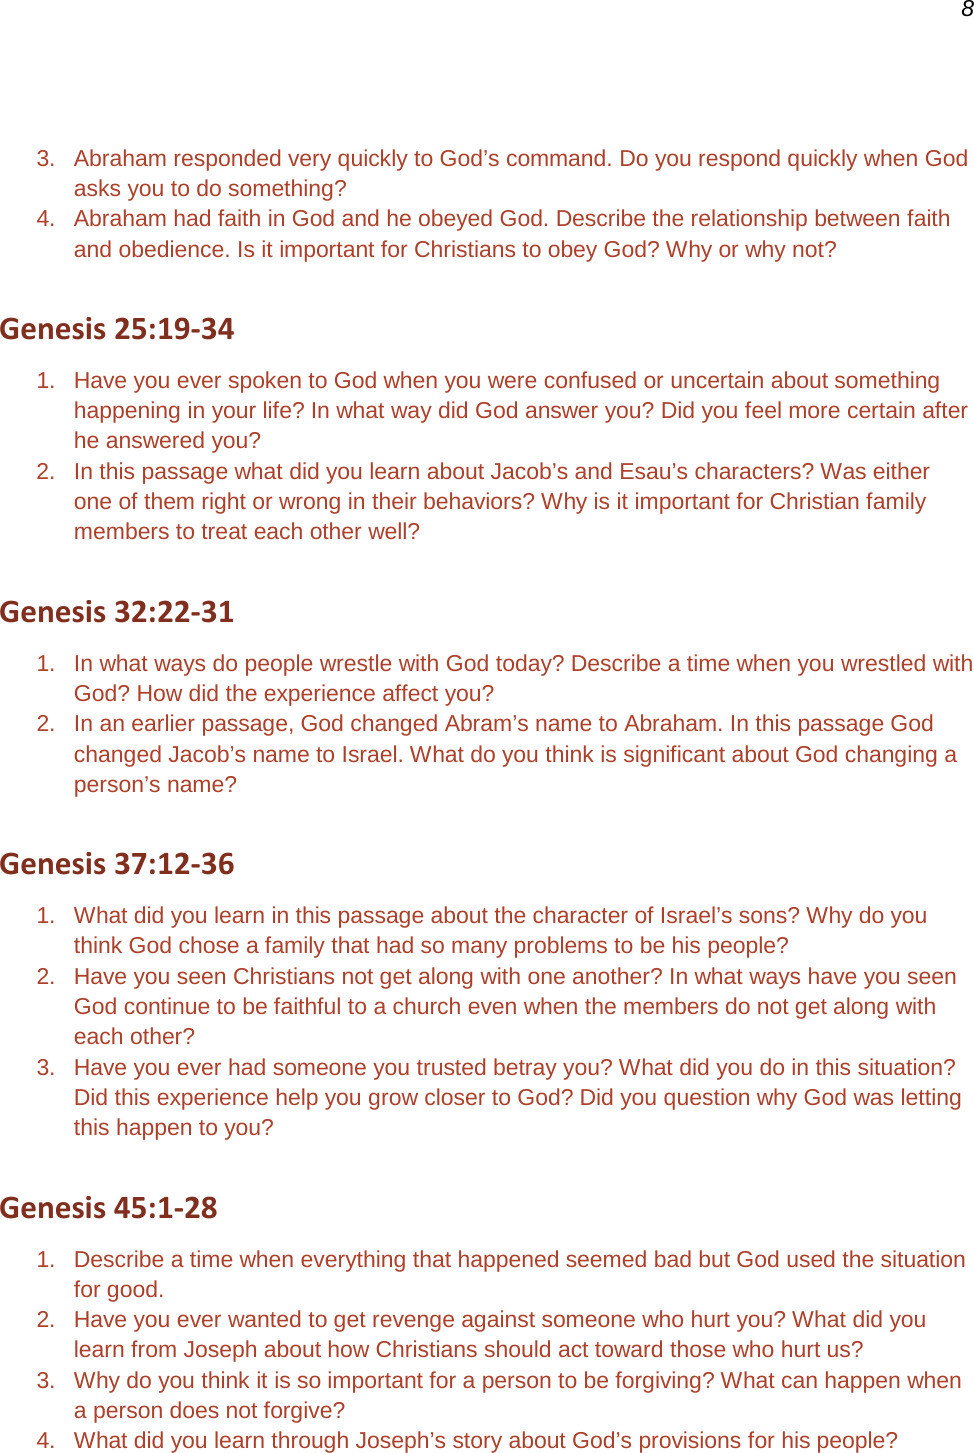 Page 8 of 9 - 4. Application Guide For Genesis